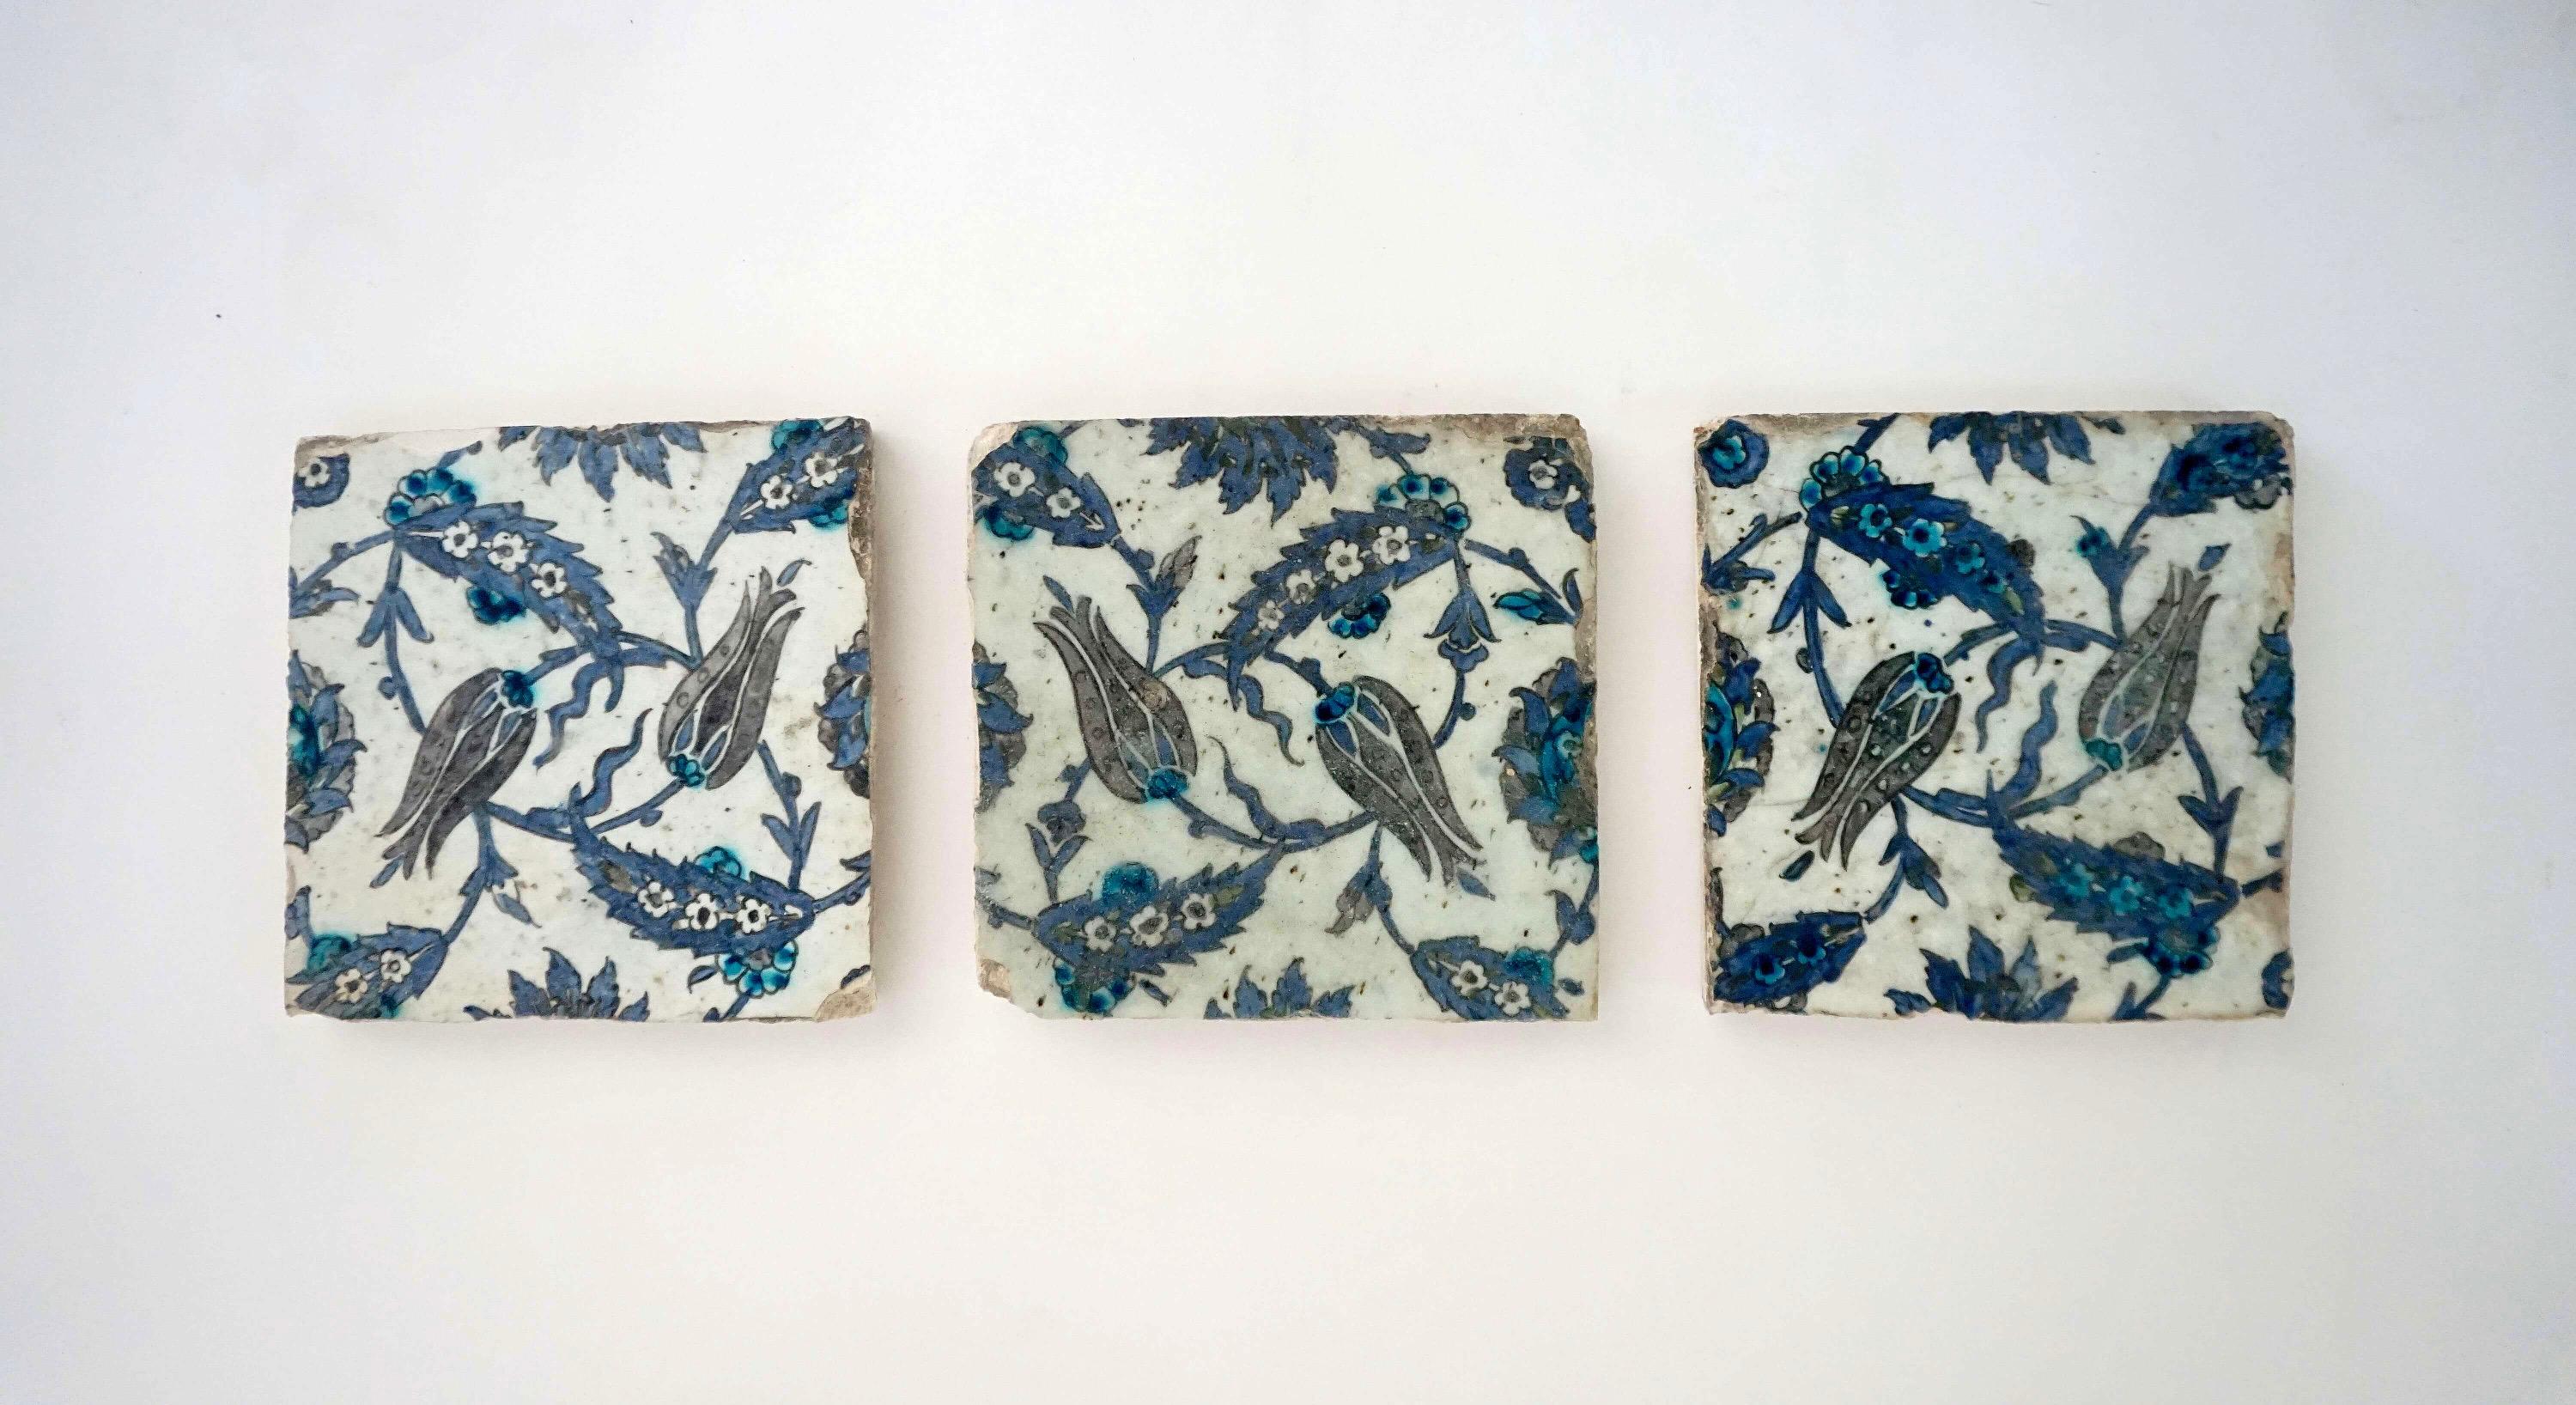 A collection of three 17th century Turkish Ottoman Iznik pottery wall tiles having underglaze-polychrome decoration of stylized tulips and 'saz leaf' designs in black, blue, and turquoise on white background.